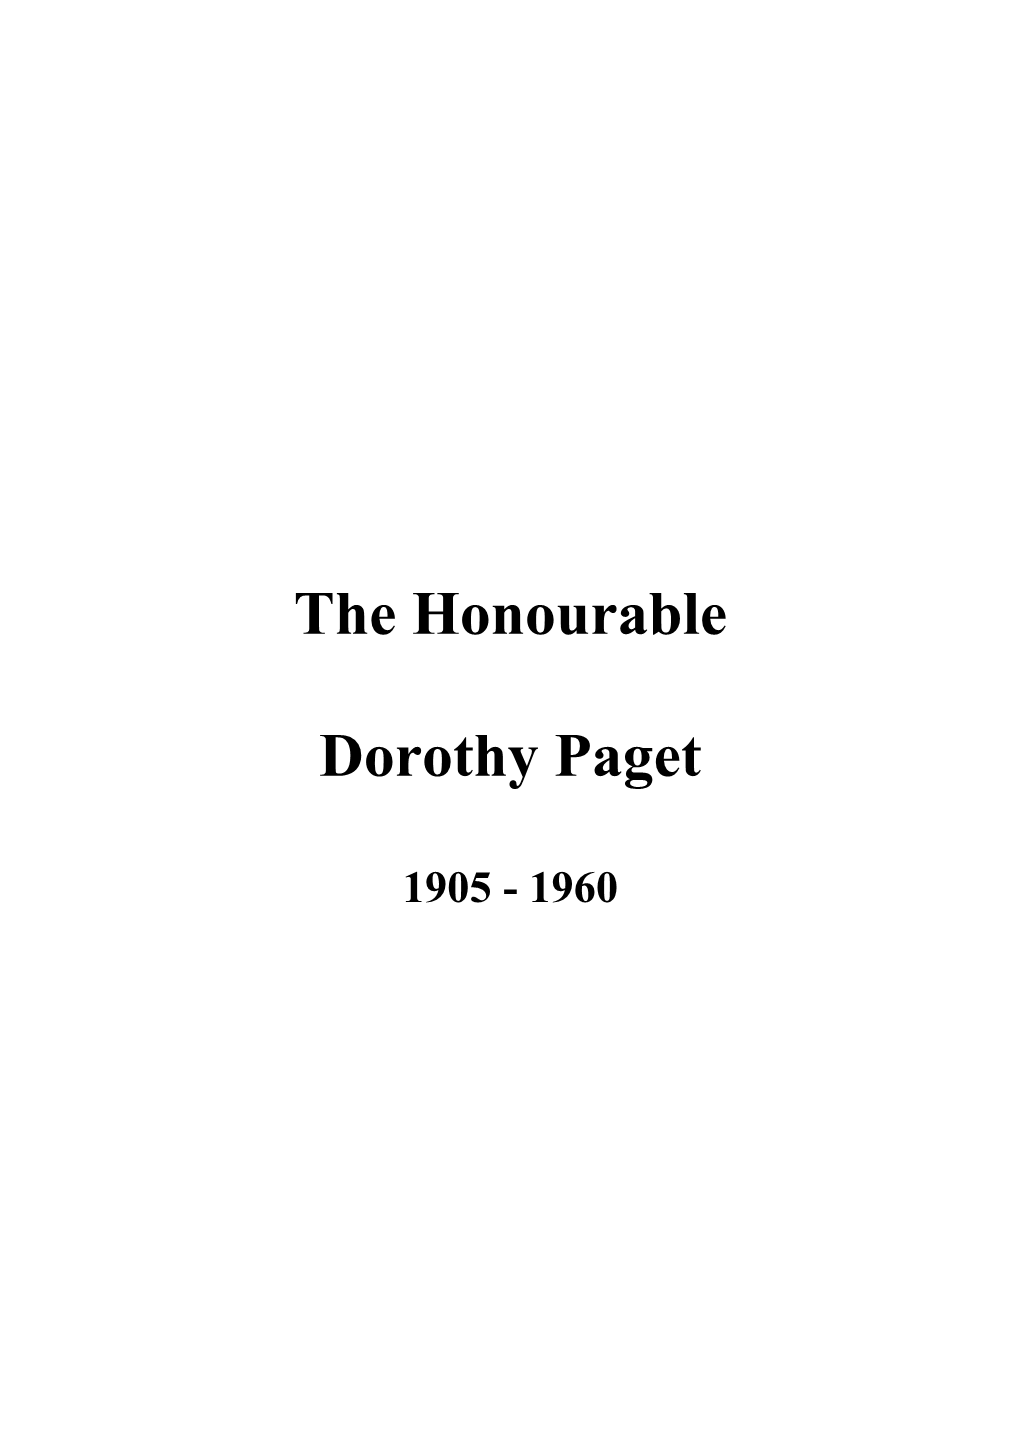 The Honourable Dorothy Paget, One of the Most Famous Racehorse Owners in This Country During the Last Century